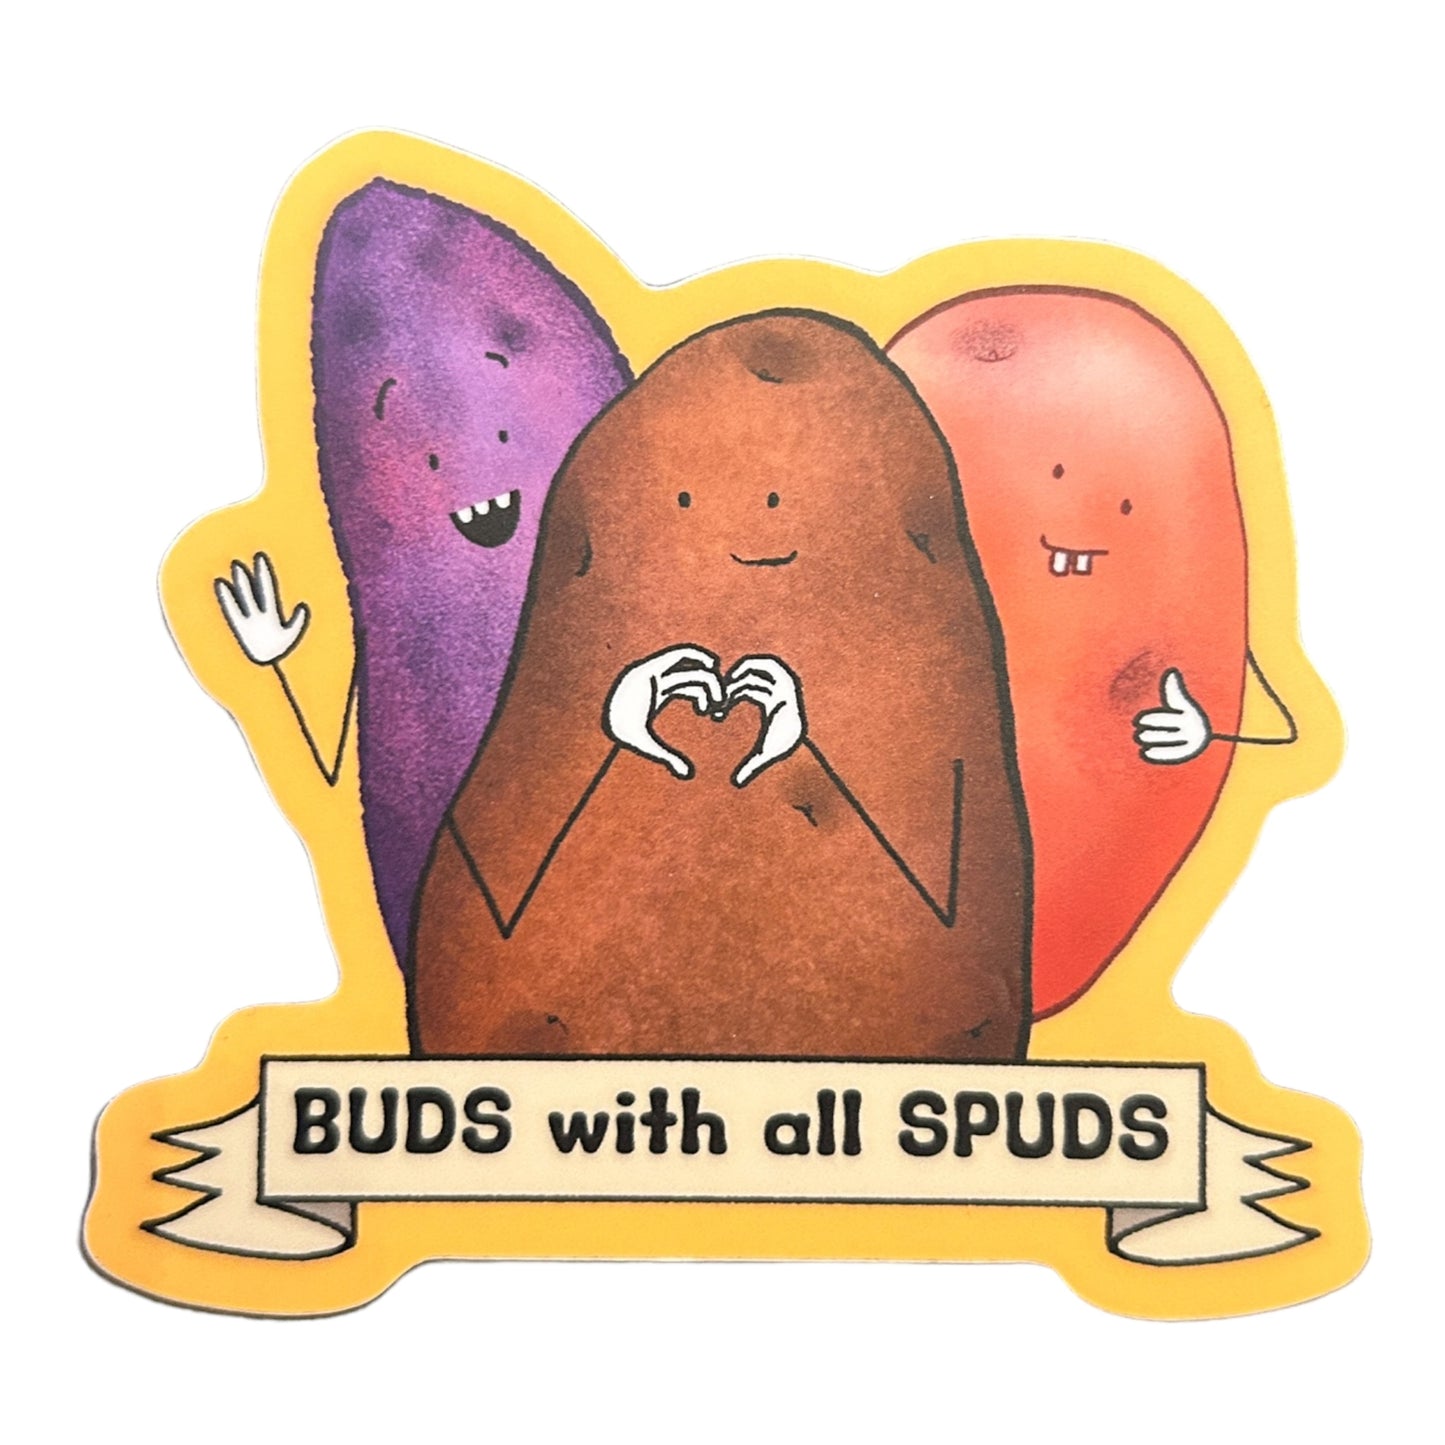 BUDS with all SPUDS vinyl sticker